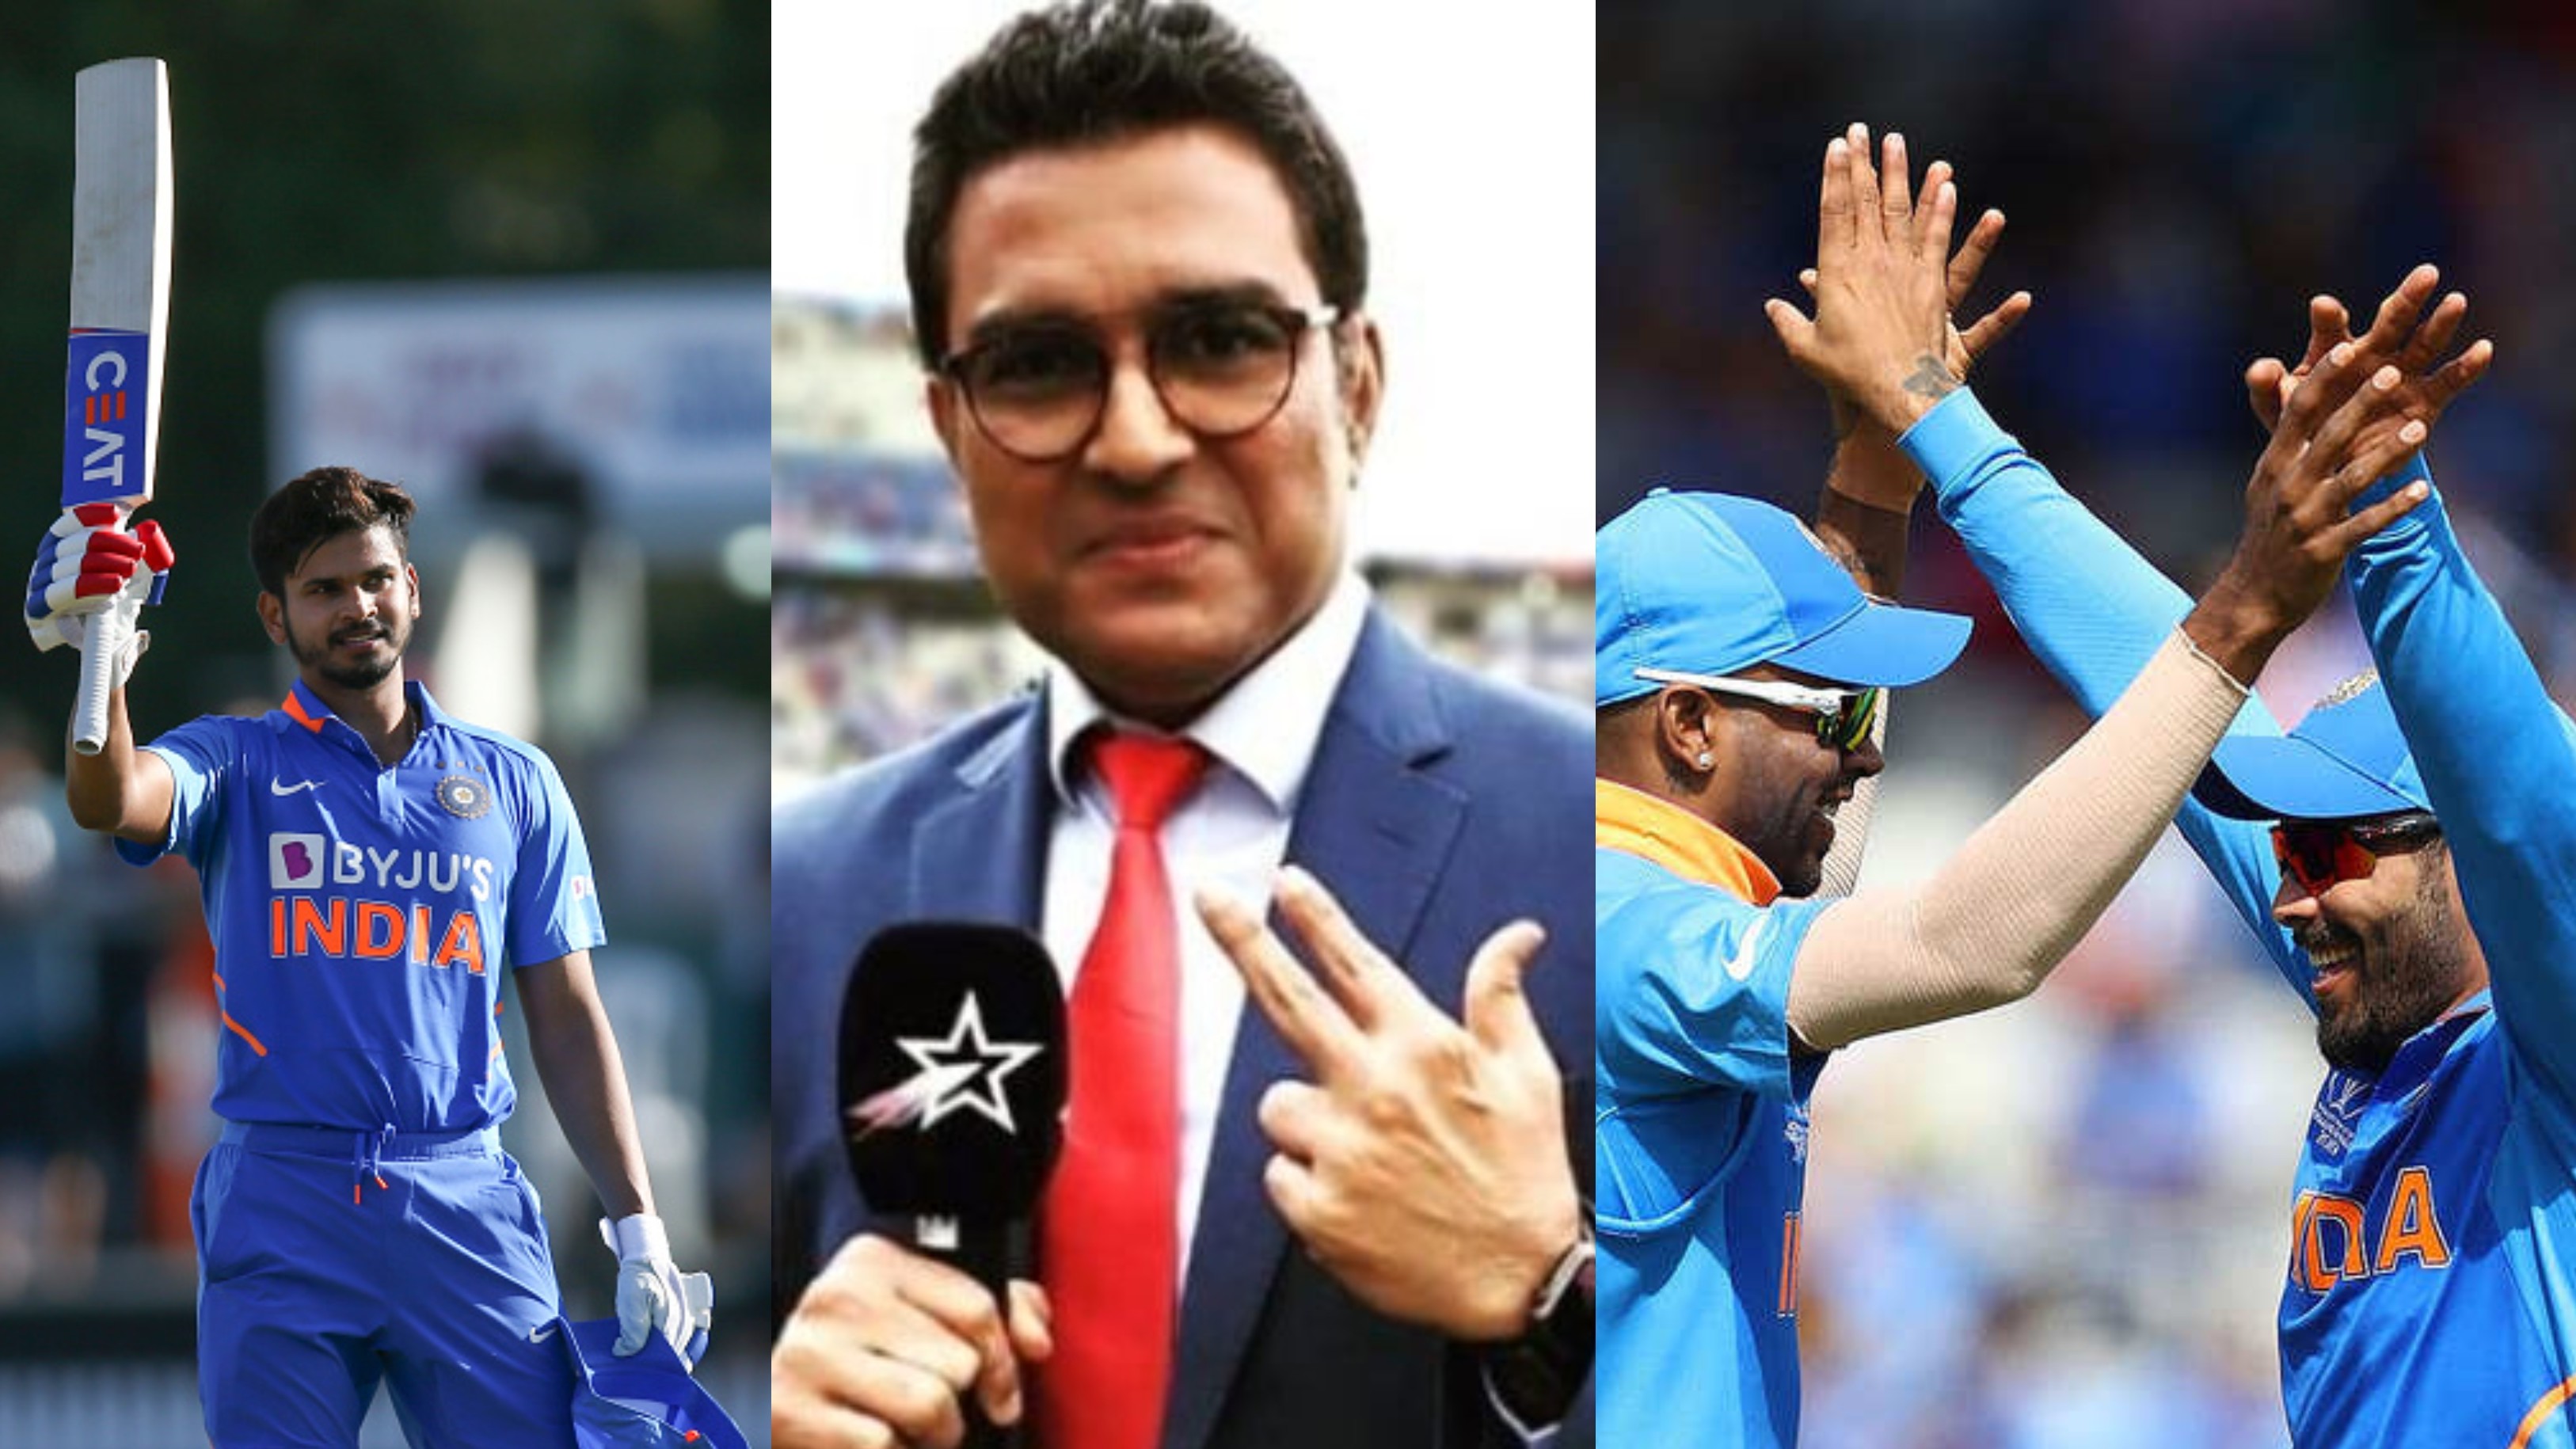 T20WC 2020: Sanjay Manjrekar reveals his picks for India’s no. 4 and all-rounder spot for T20 World Cup 